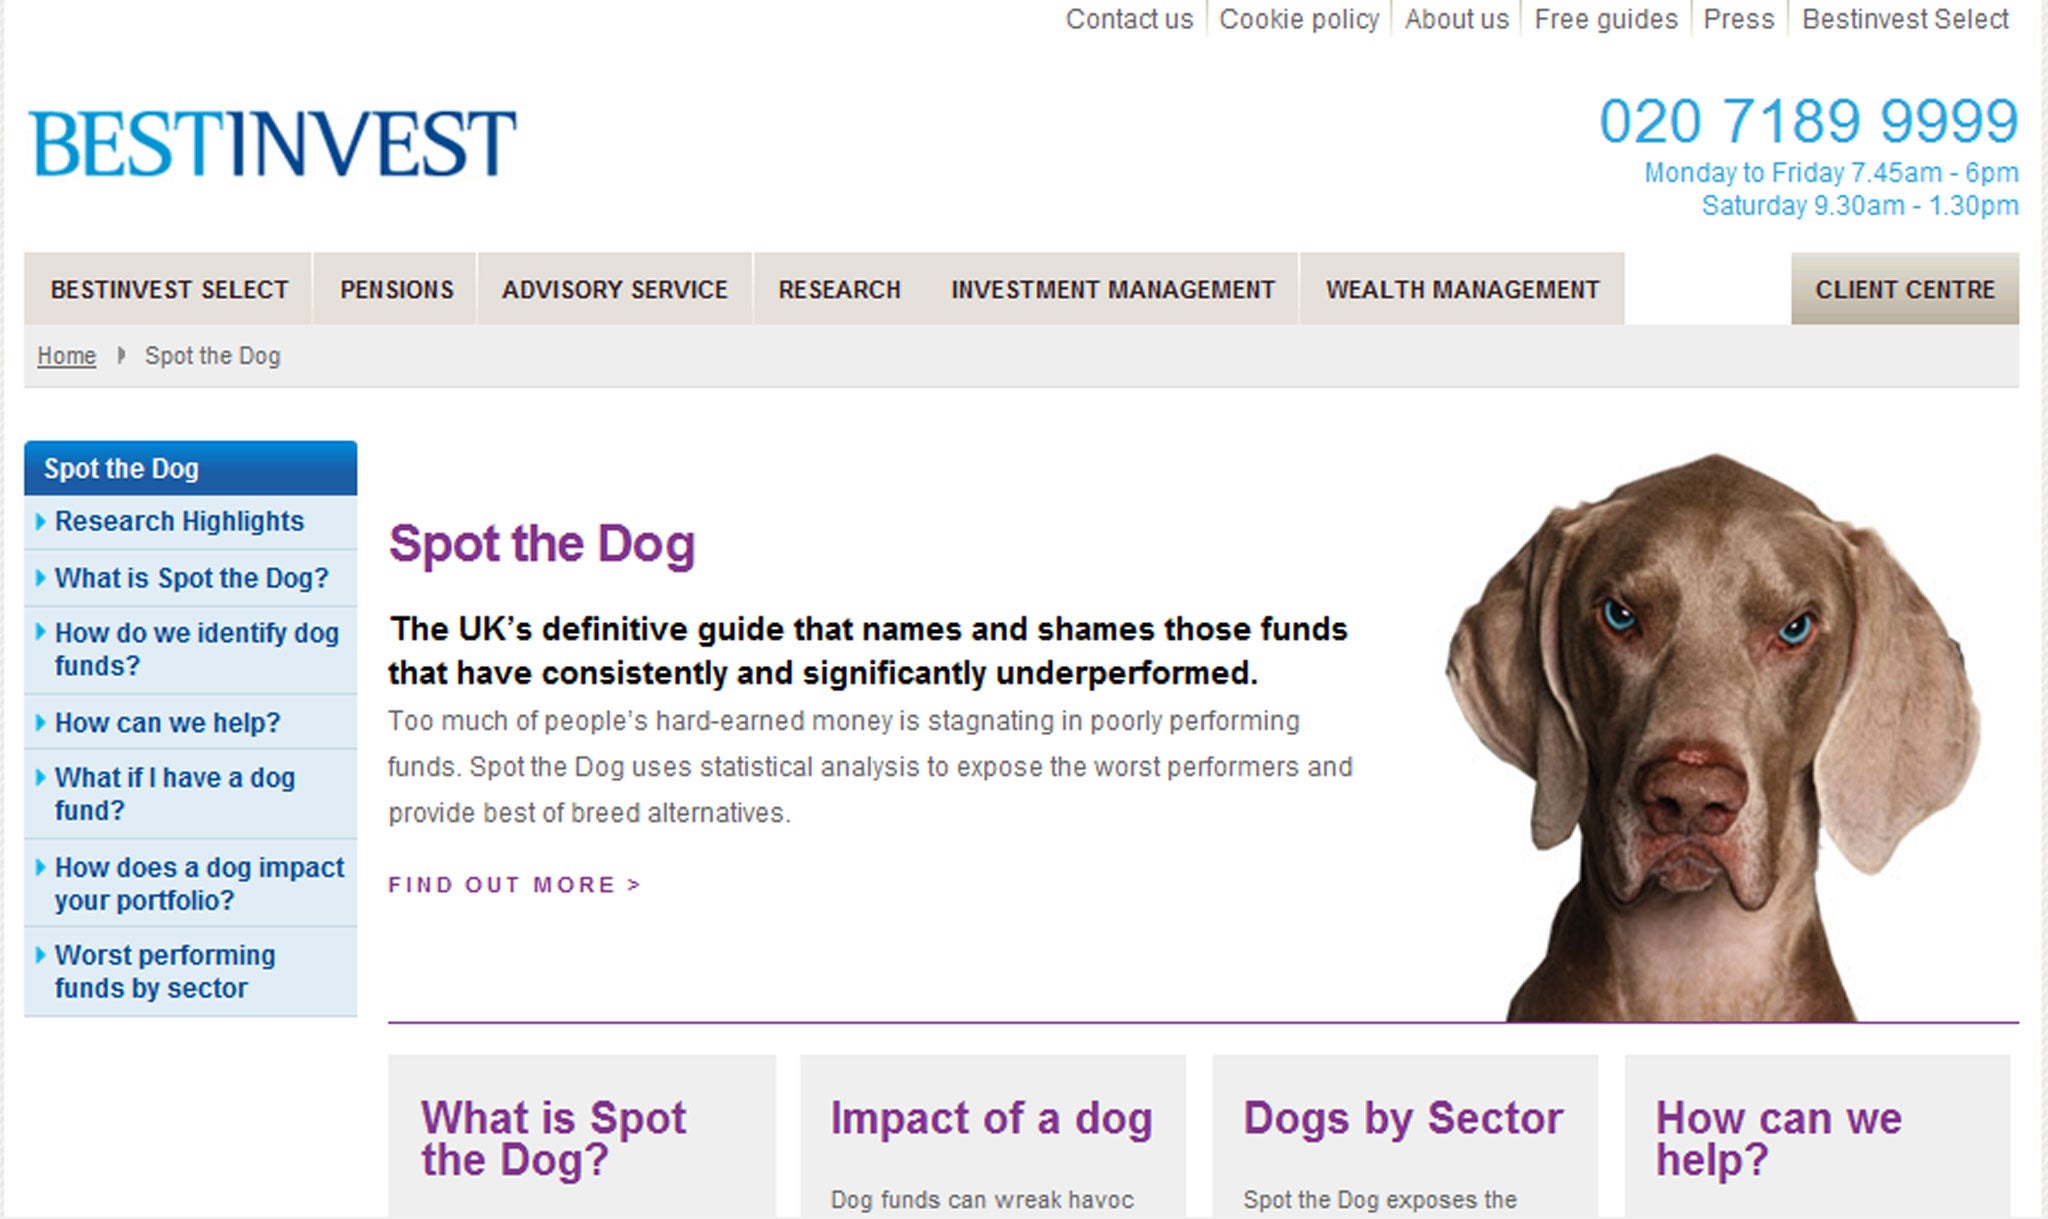 You can get a free copy of the latest Spot the Dog report from www.bestinvest.co.uk/dogs